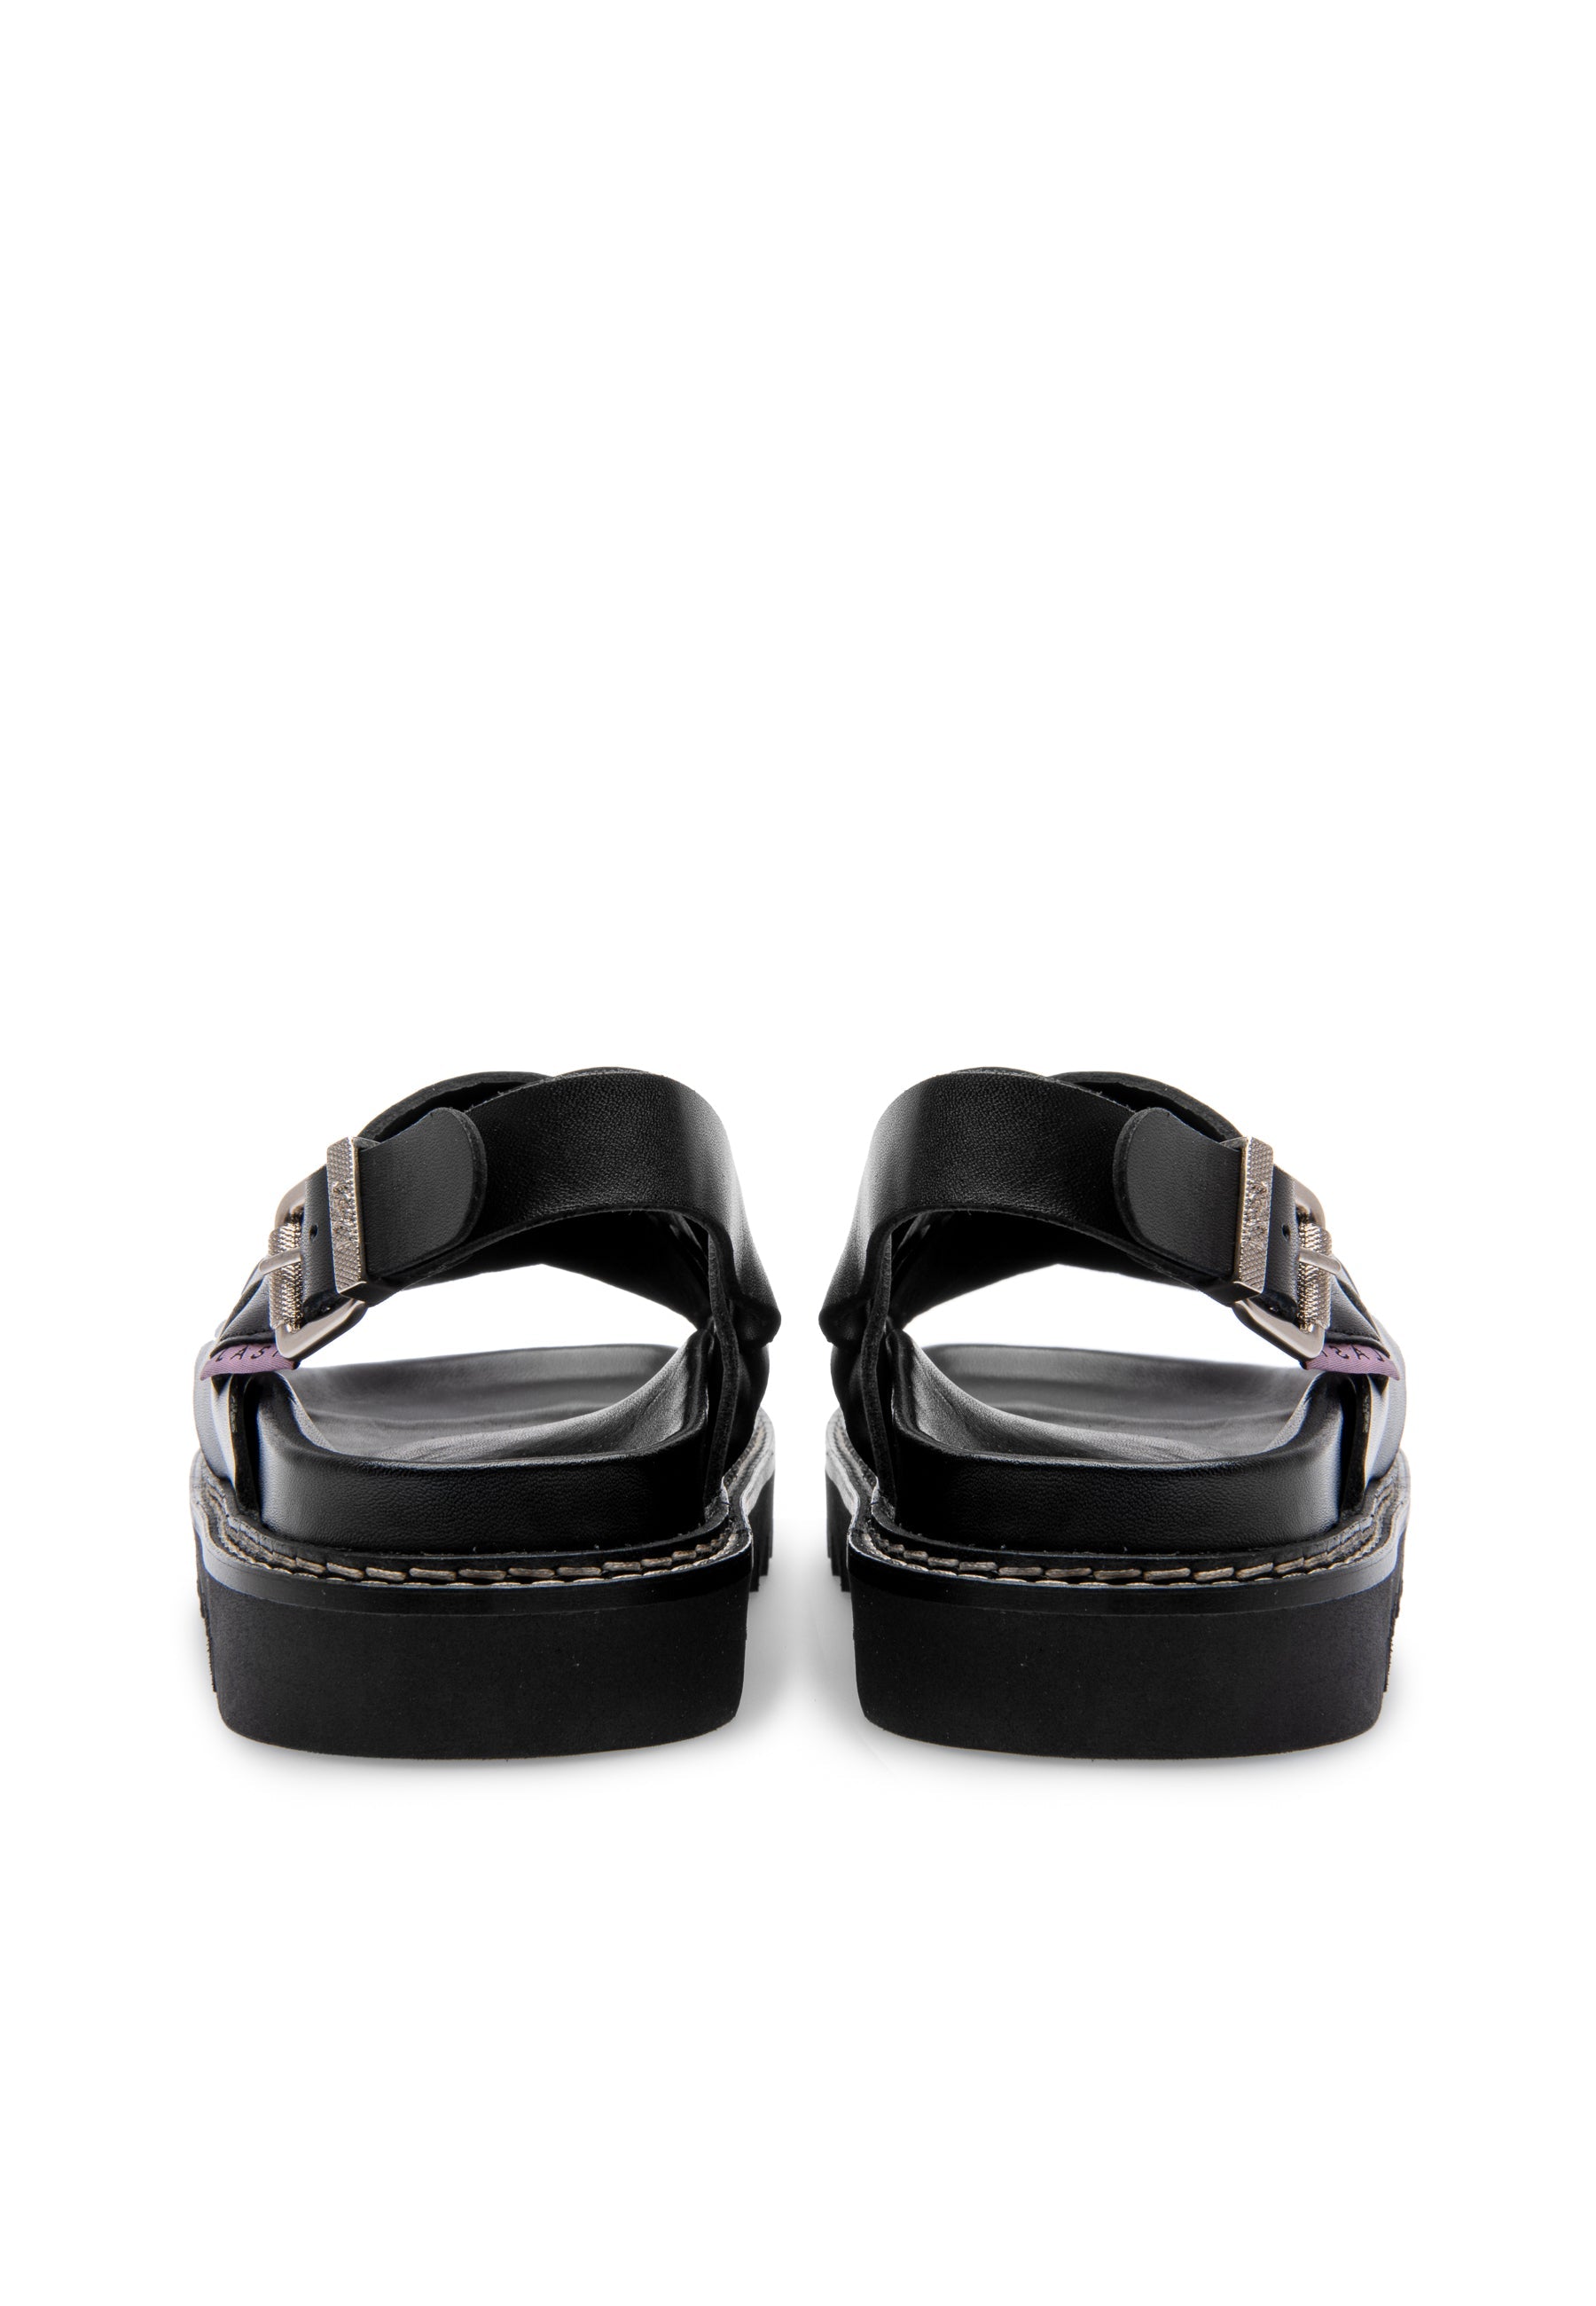 Maggie Black Leather Chunky Sandals LAST1553 - 5